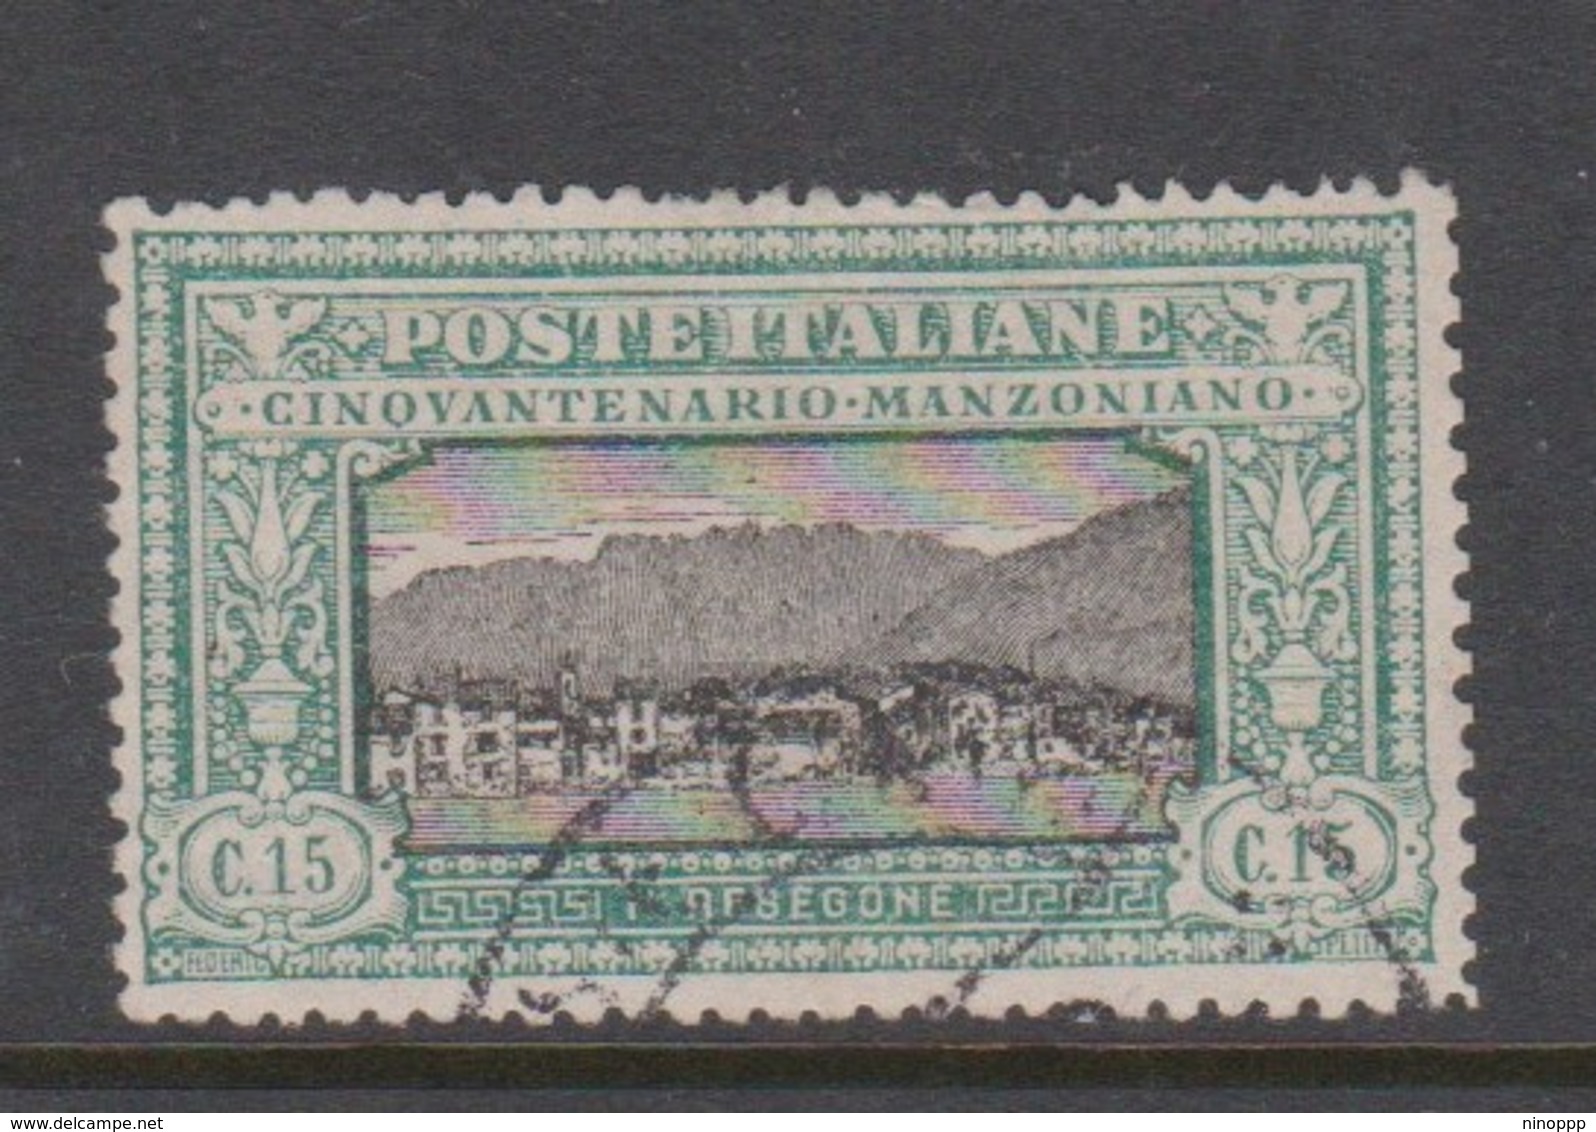 Italy S 152 1923 50th Anniversary Death Of Manzoni, 15c Green And Black, Used - Oblitérés